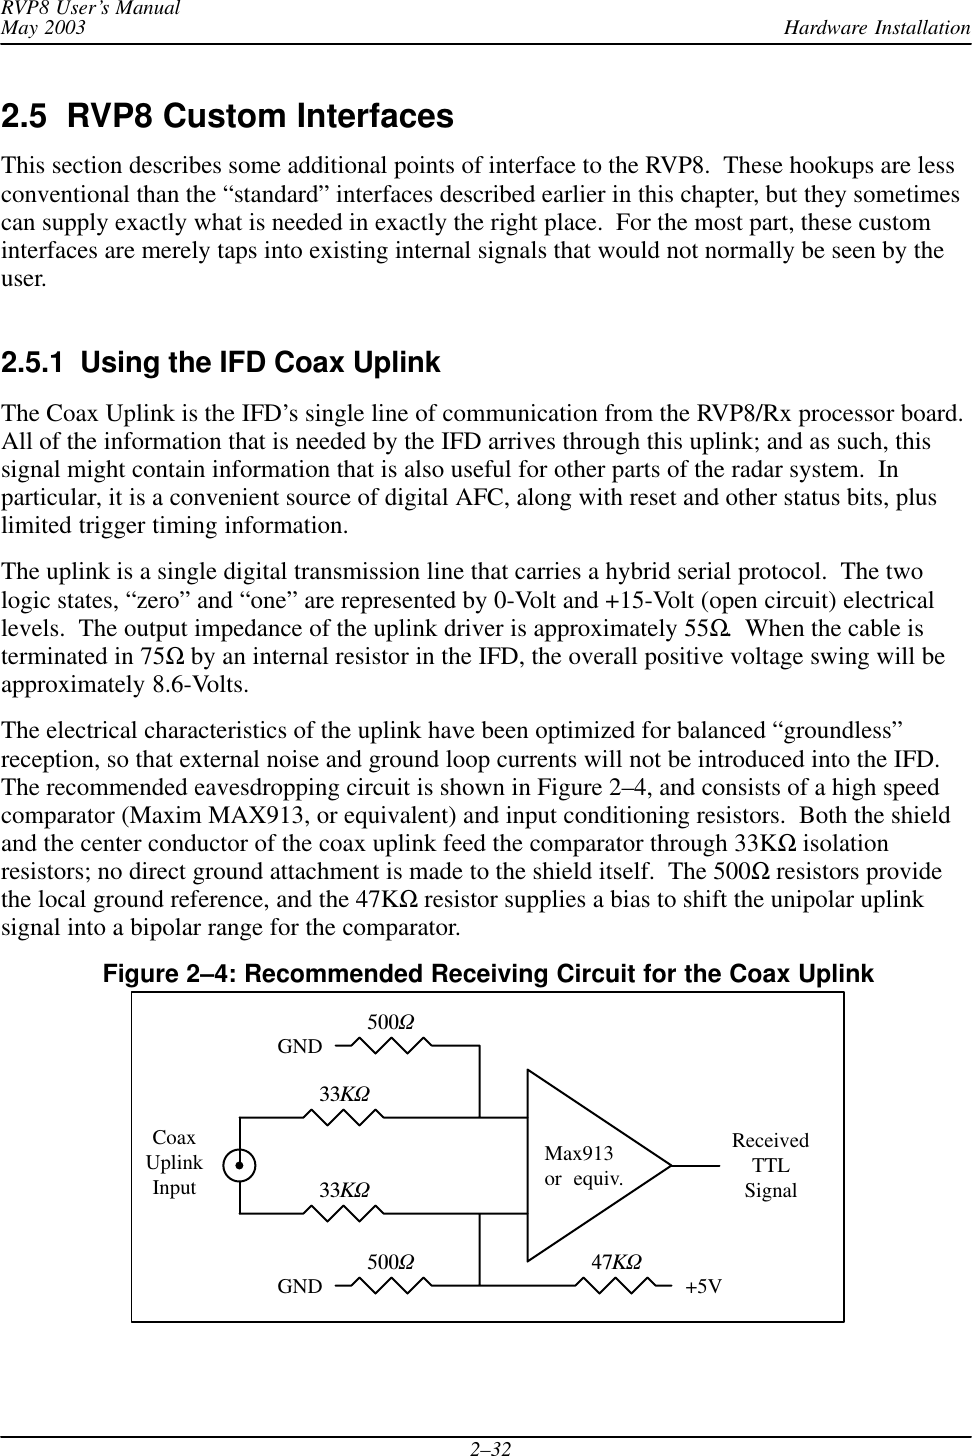 Hardware InstallationRVP8 User’s ManualMay 20032–322.5  RVP8 Custom InterfacesThis section describes some additional points of interface to the RVP8.  These hookups are lessconventional than the “standard” interfaces described earlier in this chapter, but they sometimescan supply exactly what is needed in exactly the right place.  For the most part, these custominterfaces are merely taps into existing internal signals that would not normally be seen by theuser.2.5.1  Using the IFD Coax UplinkThe Coax Uplink is the IFD’s single line of communication from the RVP8/Rx processor board.All of the information that is needed by the IFD arrives through this uplink; and as such, thissignal might contain information that is also useful for other parts of the radar system.  Inparticular, it is a convenient source of digital AFC, along with reset and other status bits, pluslimited trigger timing information.The uplink is a single digital transmission line that carries a hybrid serial protocol.  The twologic states, “zero” and “one” are represented by 0-Volt and +15-Volt (open circuit) electricallevels.  The output impedance of the uplink driver is approximately 55Ω.  When the cable isterminated in 75Ω by an internal resistor in the IFD, the overall positive voltage swing will beapproximately 8.6-Volts.The electrical characteristics of the uplink have been optimized for balanced “groundless”reception, so that external noise and ground loop currents will not be introduced into the IFD.The recommended eavesdropping circuit is shown in Figure 2–4, and consists of a high speedcomparator (Maxim MAX913, or equivalent) and input conditioning resistors.  Both the shieldand the center conductor of the coax uplink feed the comparator through 33KΩ isolationresistors; no direct ground attachment is made to the shield itself.  The 500Ω resistors providethe local ground reference, and the 47KΩ resistor supplies a bias to shift the unipolar uplinksignal into a bipolar range for the comparator.Figure 2–4: Recommended Receiving Circuit for the Coax UplinkMax913or  equiv.33K33K50050047KReceivedTTLSignal+5VGNDGNDCoaxUplinkInput